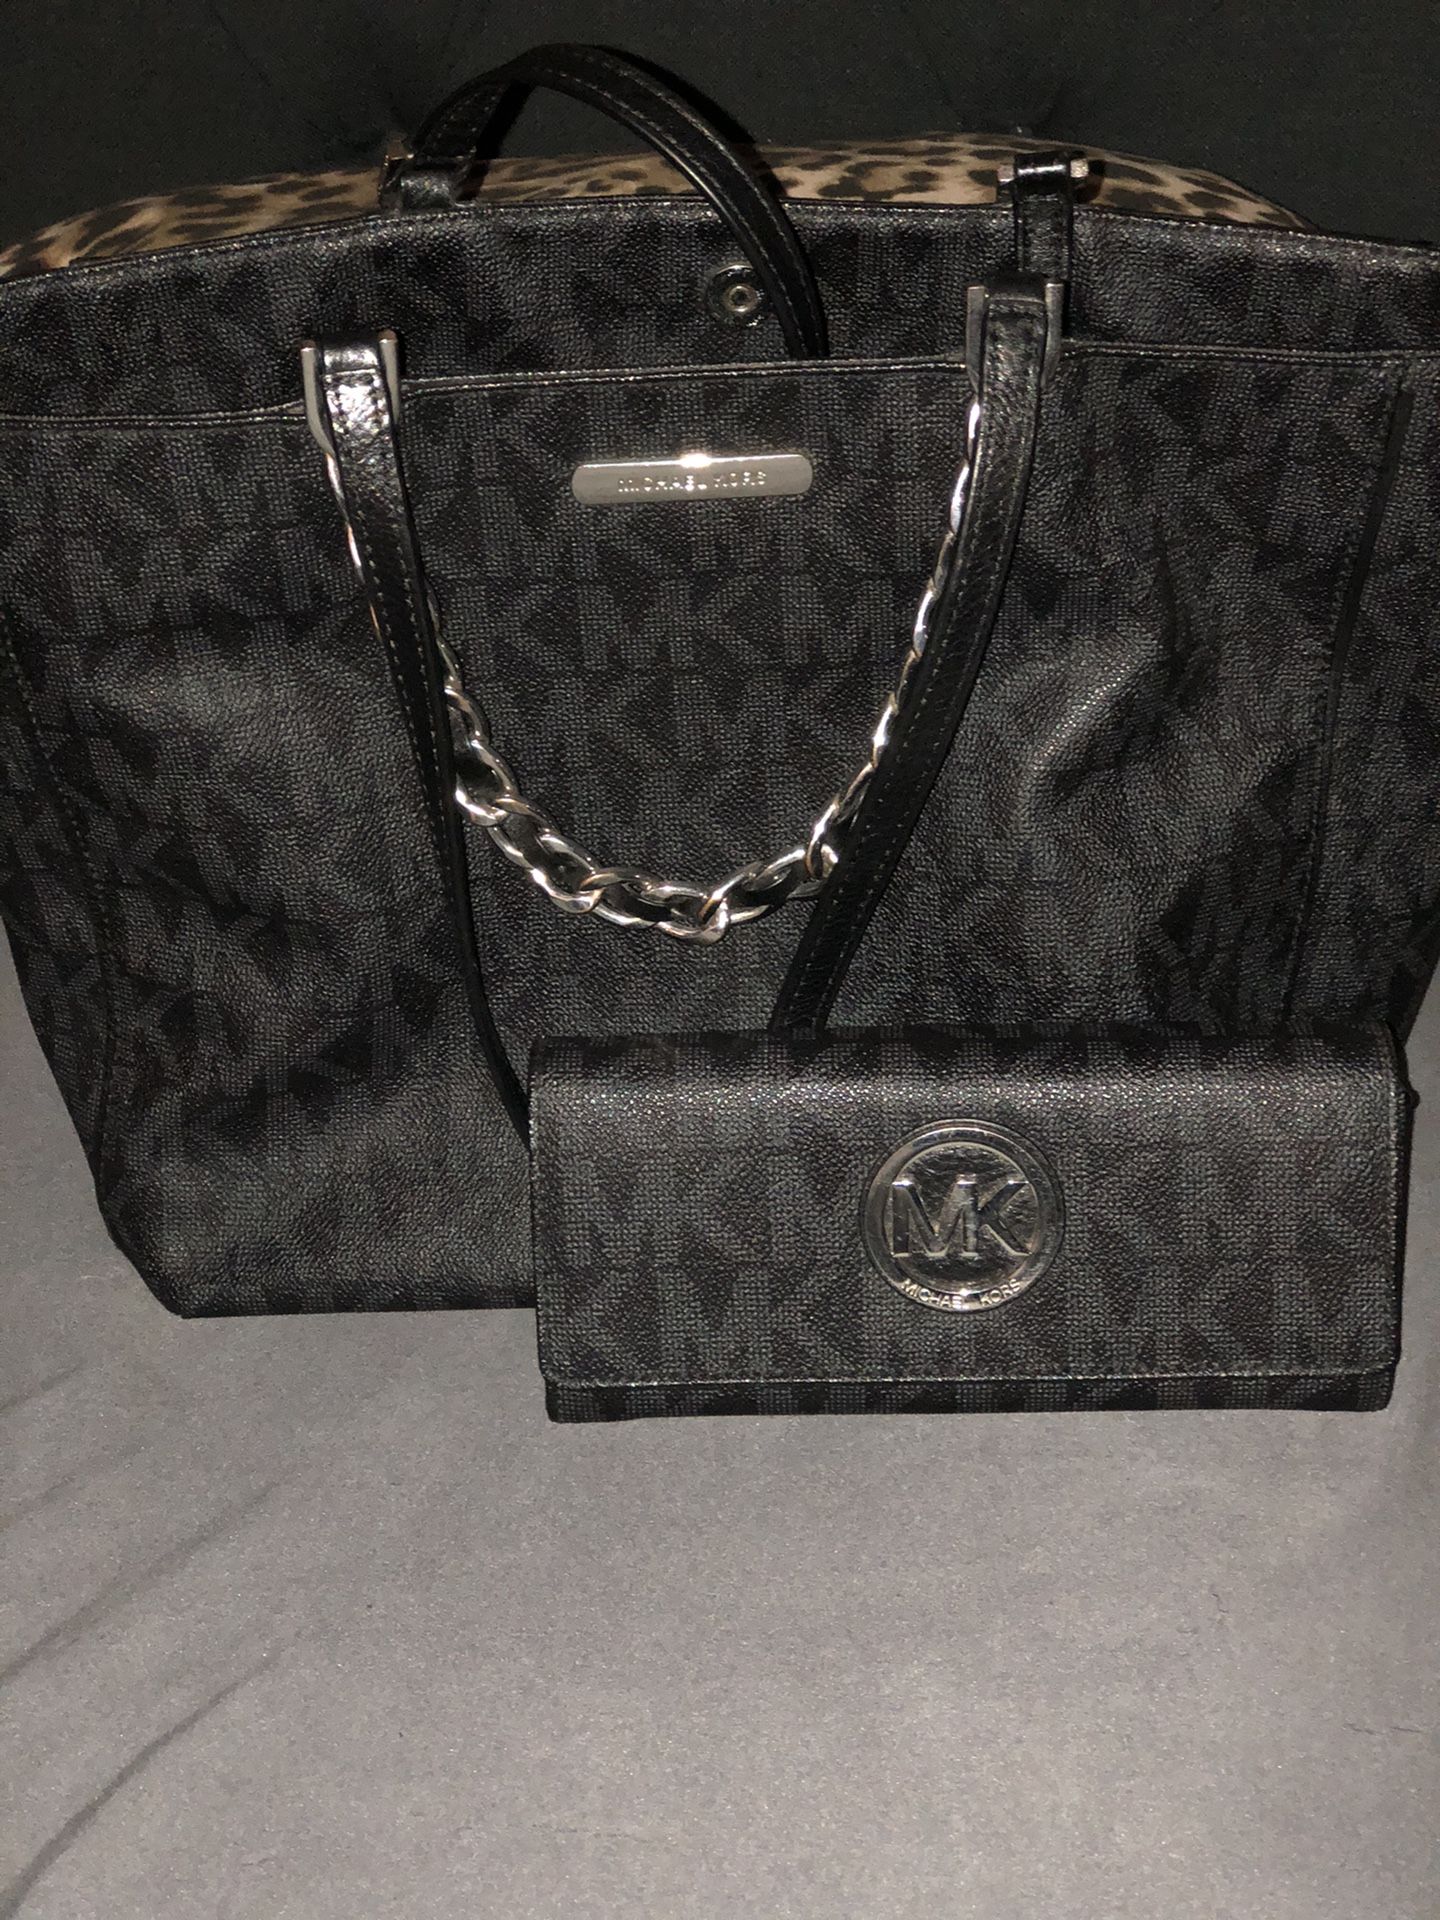 Michael Kors purse and wallet